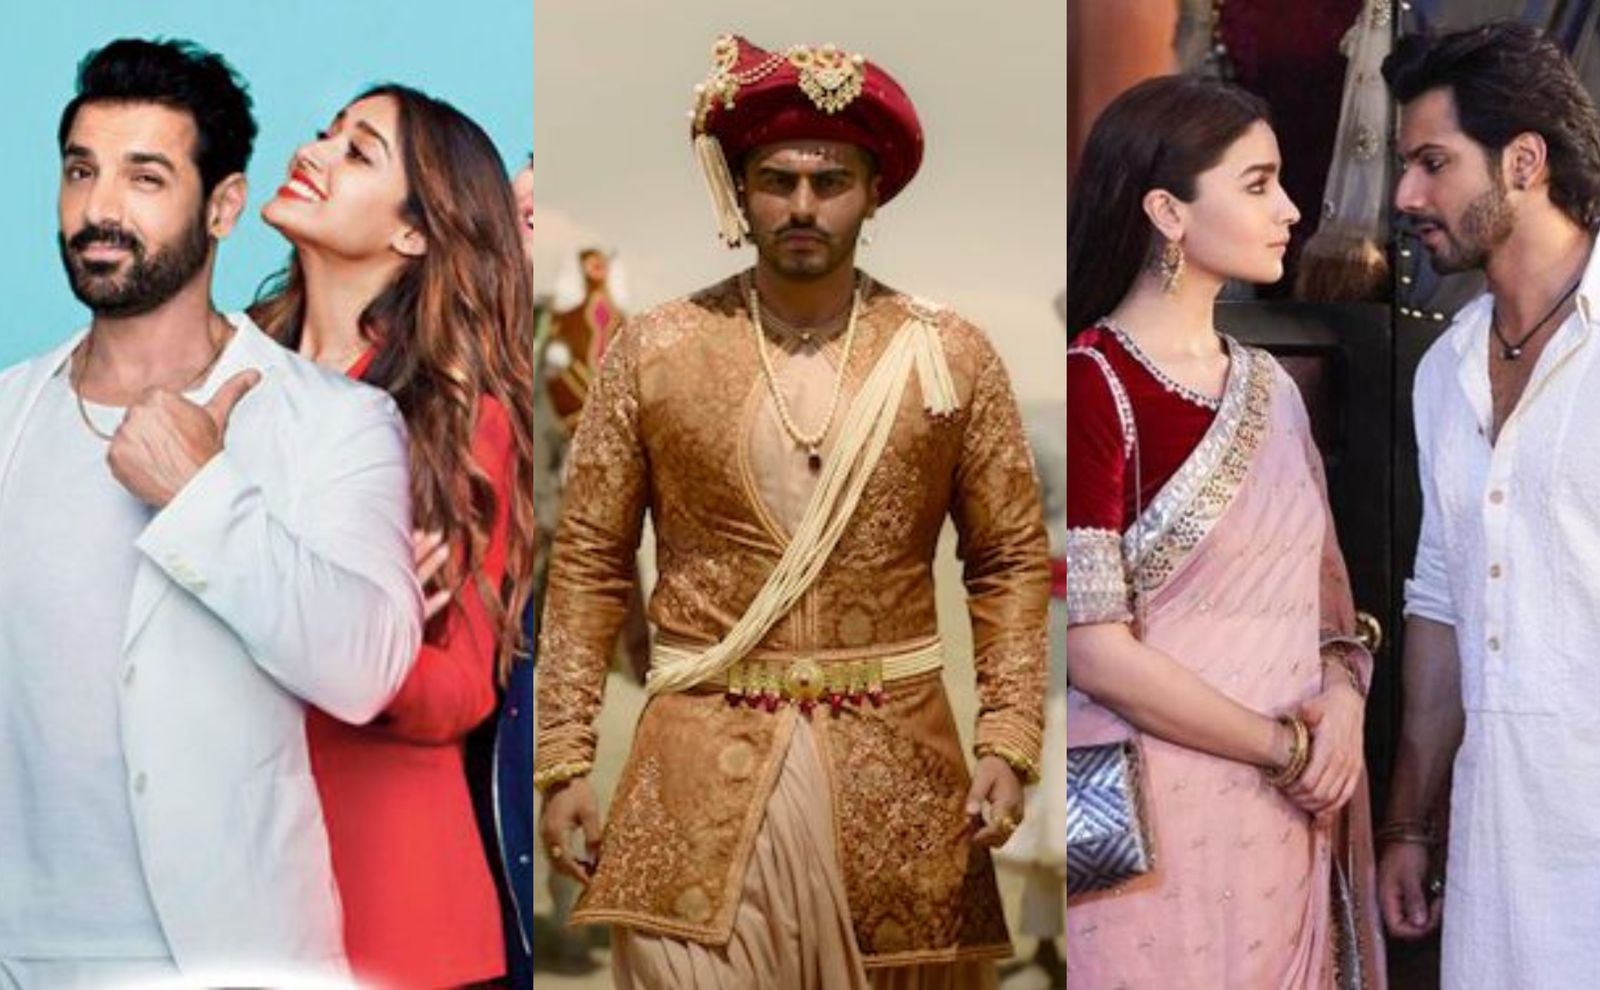 Top-10 Flops And Disasters Of 2019: Kalank, Pagalpanti, Laal Kaptaan Failed To Live Upto Expectations; See Complete List